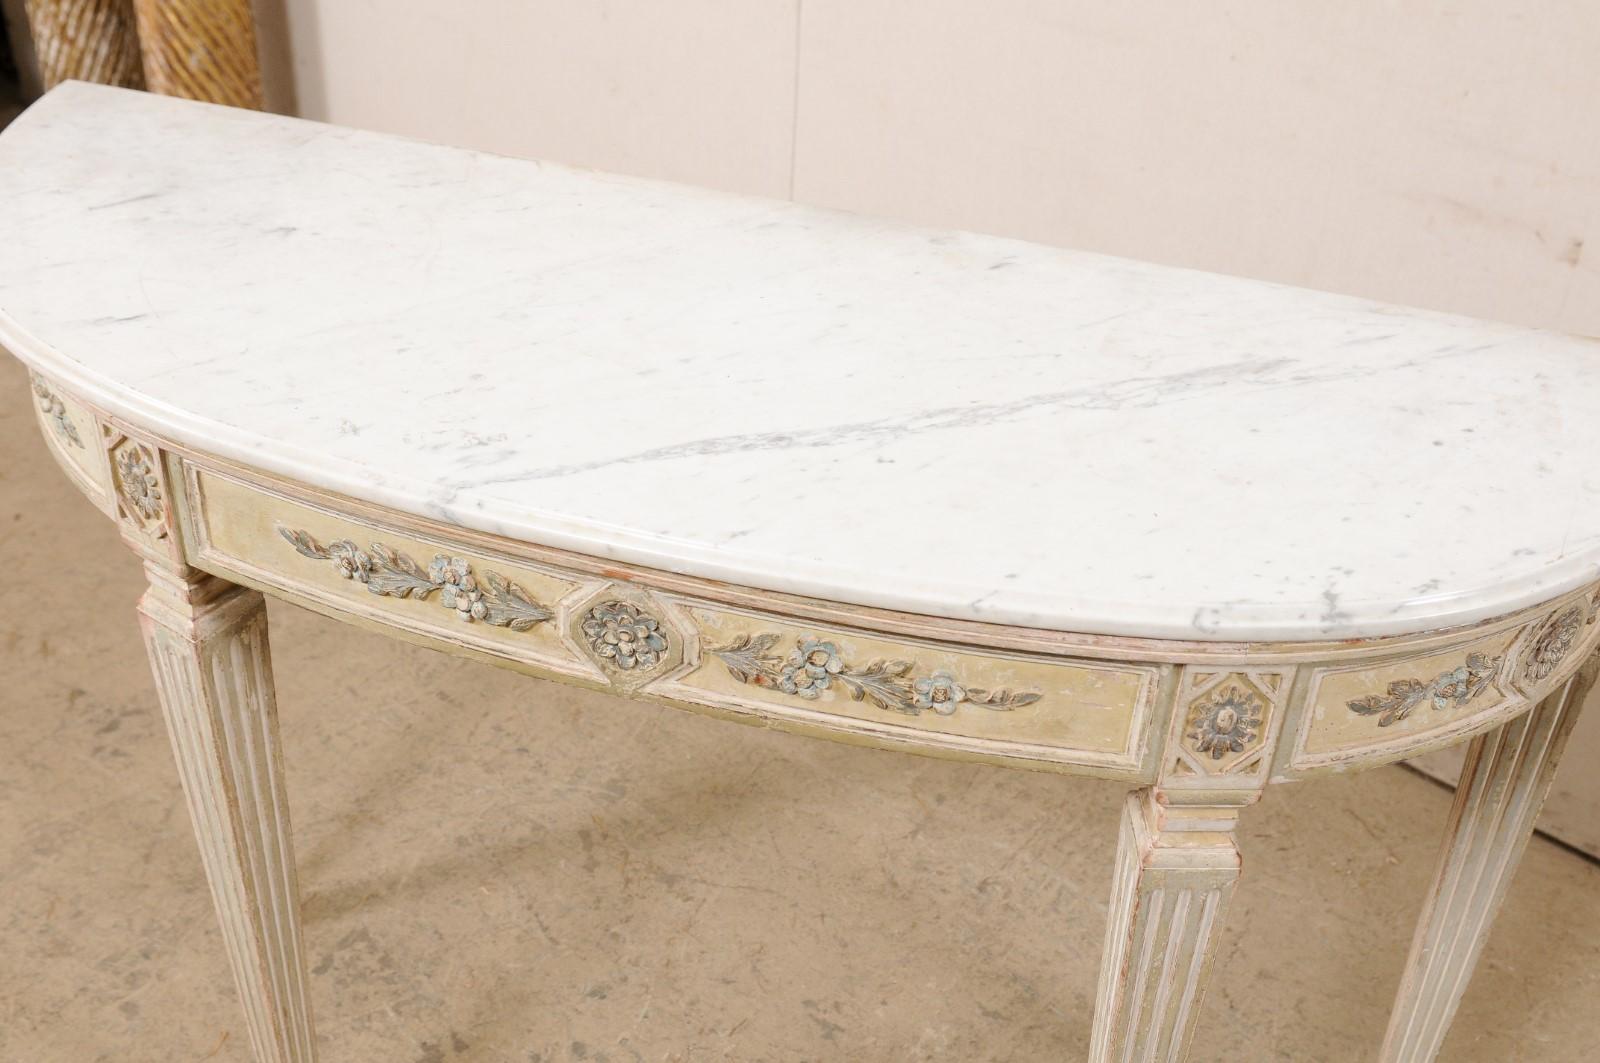 20th Century French Carved Wood Demi-lune Console Table w/Original Marble Top, Mid 20th C.